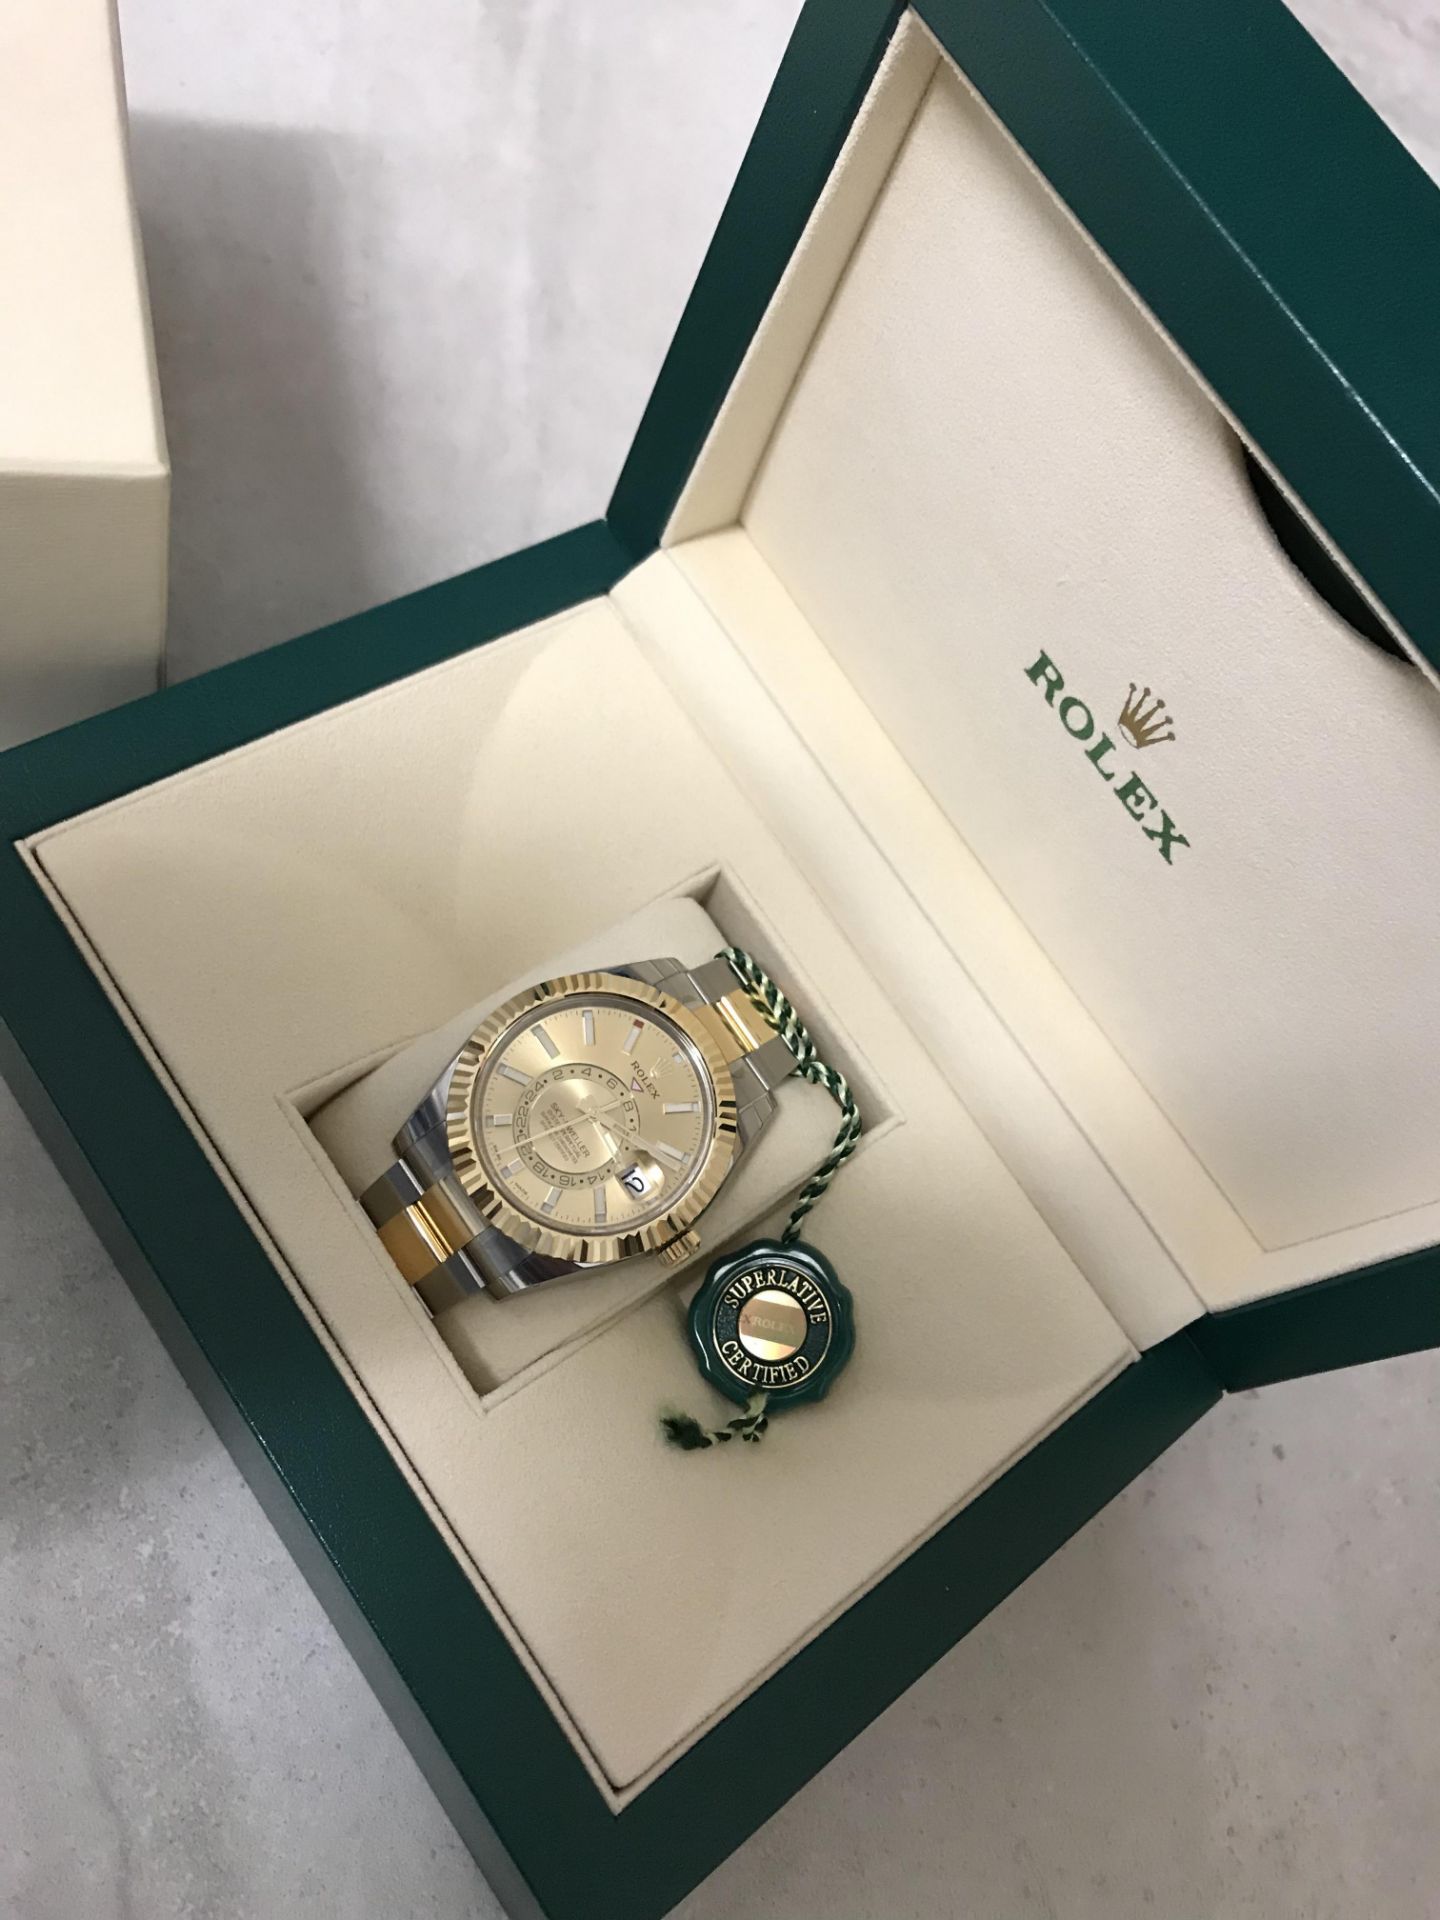 2018 ROLEX SKY-DWELLER OYSTER 42MM, OYSTER STEEL AND YELLOW GOLD **BRAND NEW** 10% BUYERS PREMIUM - Image 4 of 12